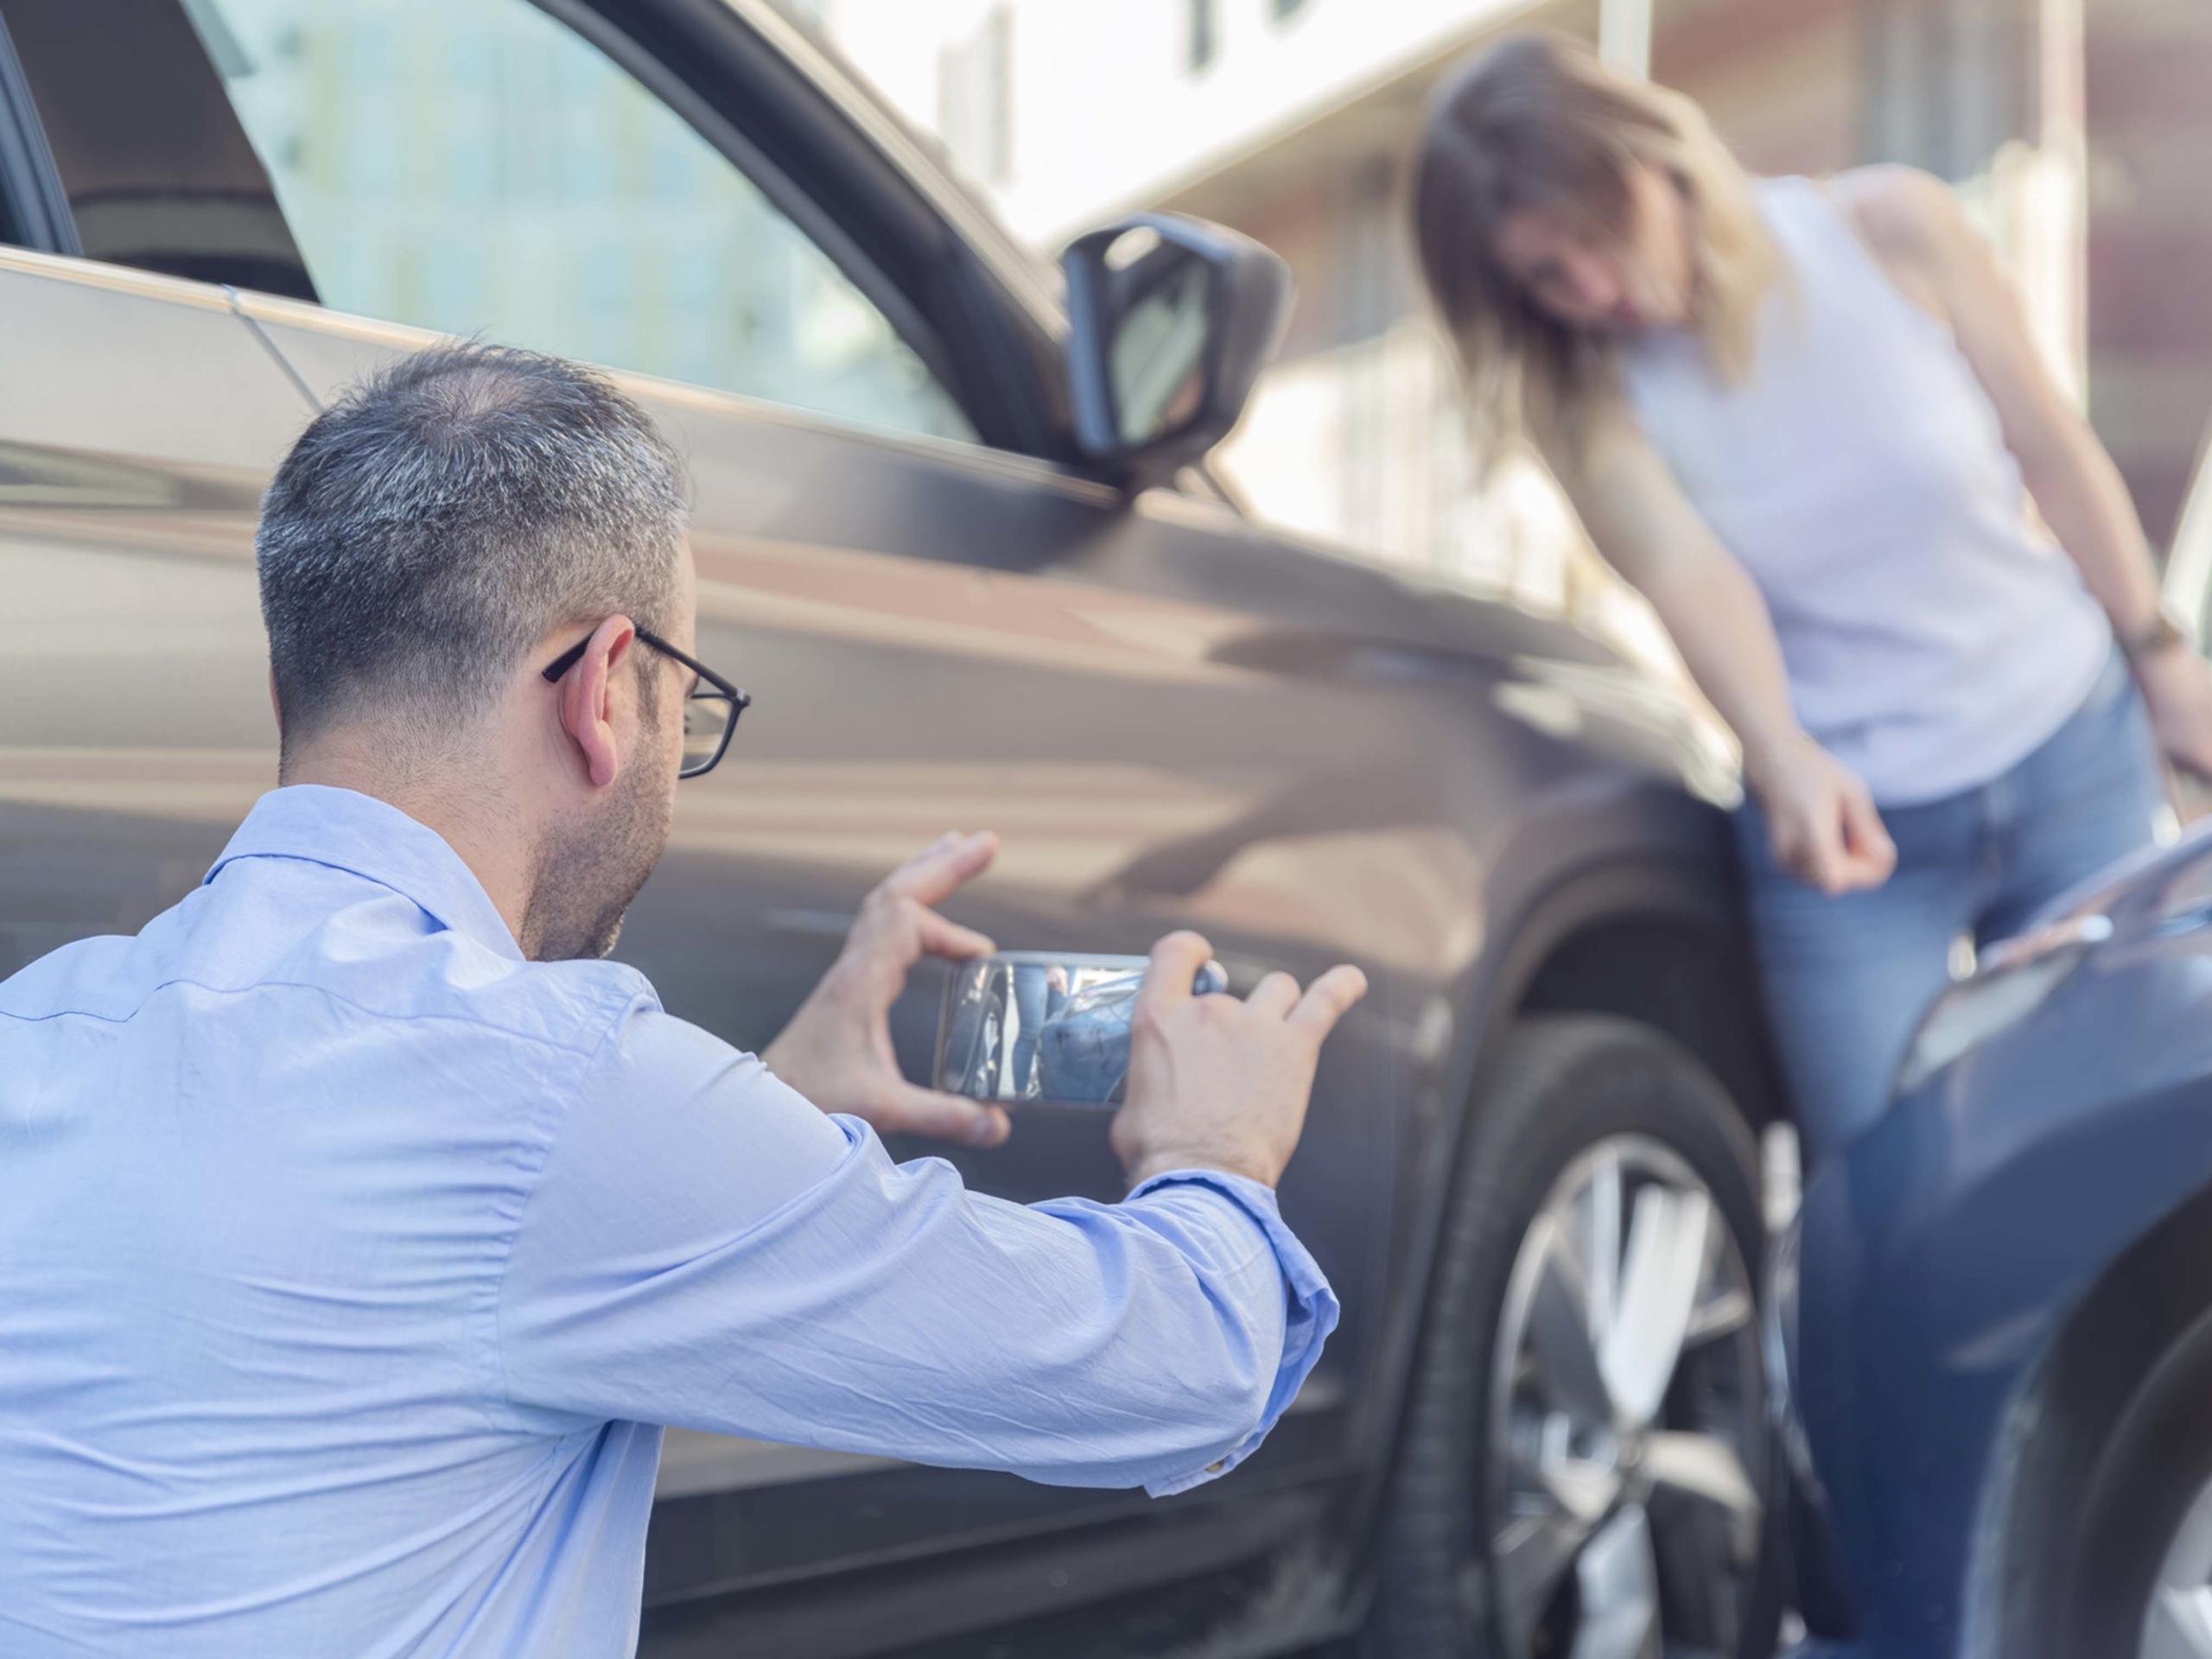 Photographing Car After A Traffic Accident